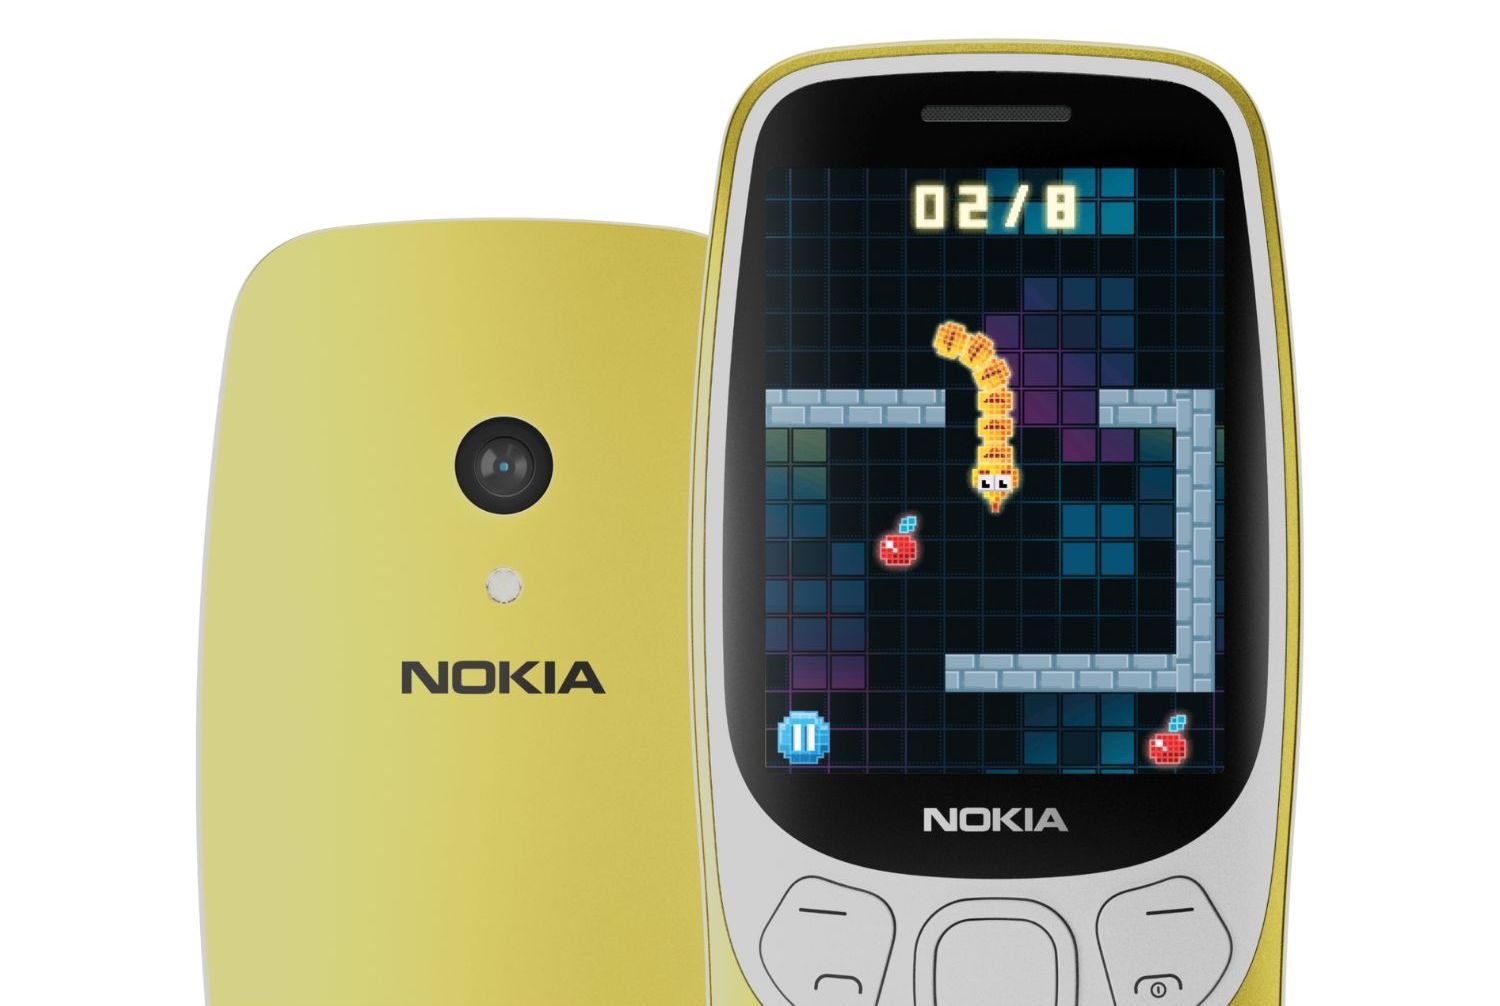 Image of yellow Nokia 3210. Shown on its display is the game Snake 